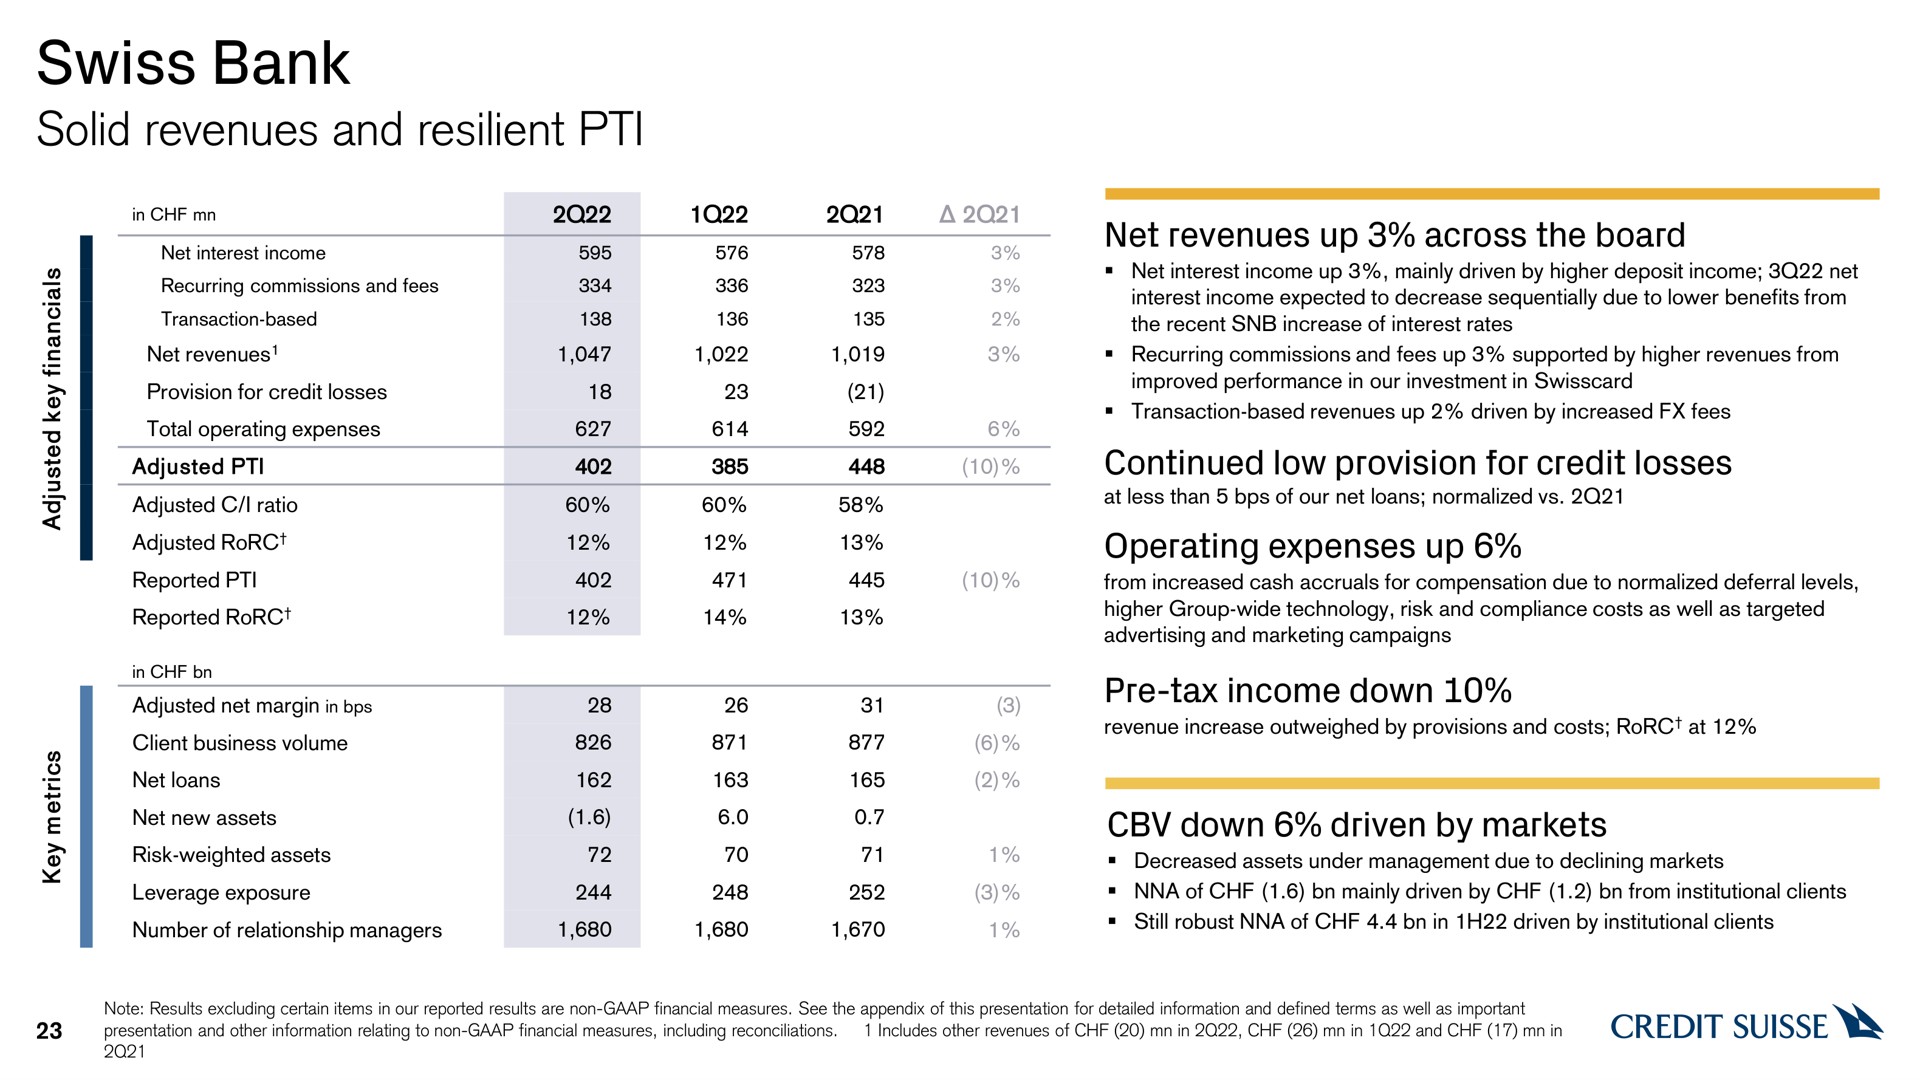 swiss bank solid revenues and resilient down driven by markets | Credit Suisse